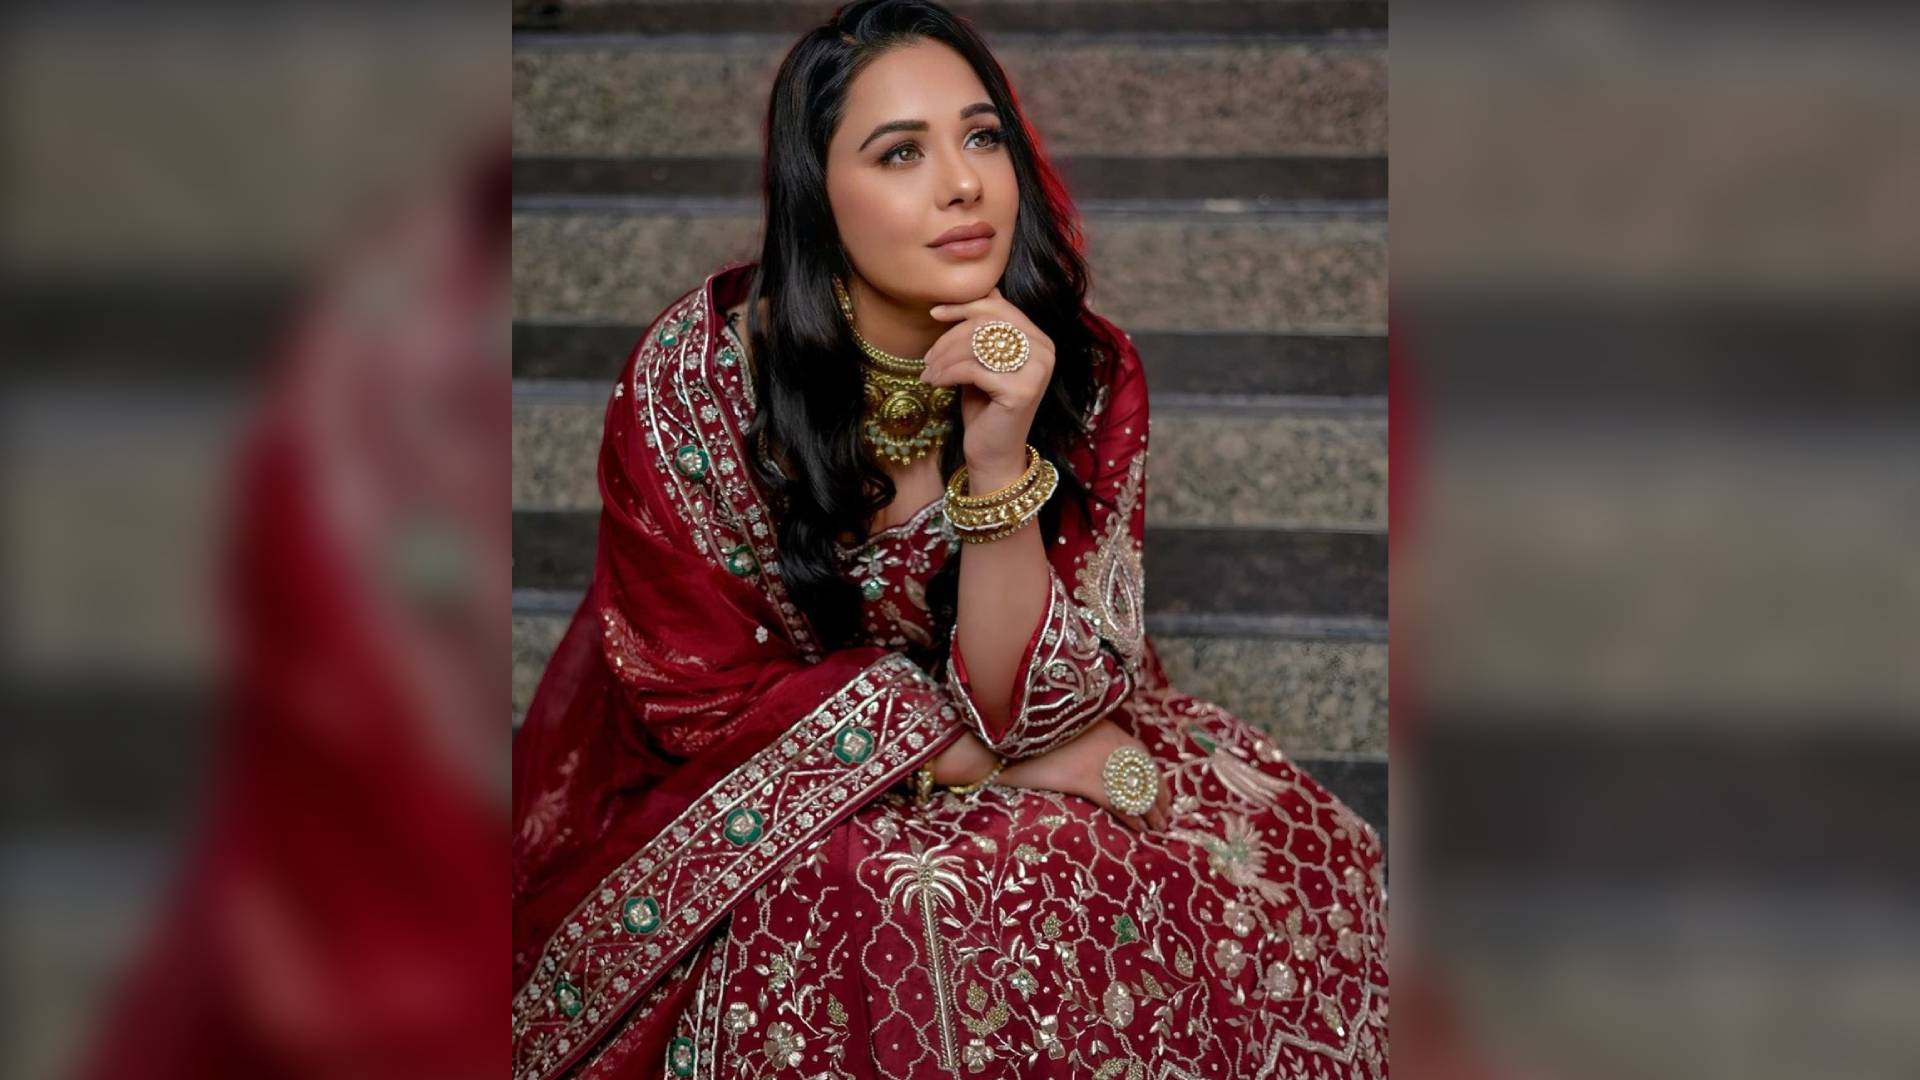 Mandy Takhar Celebrates Ram Navmi with Tradition and Rituals – Makes Puri for Everyone